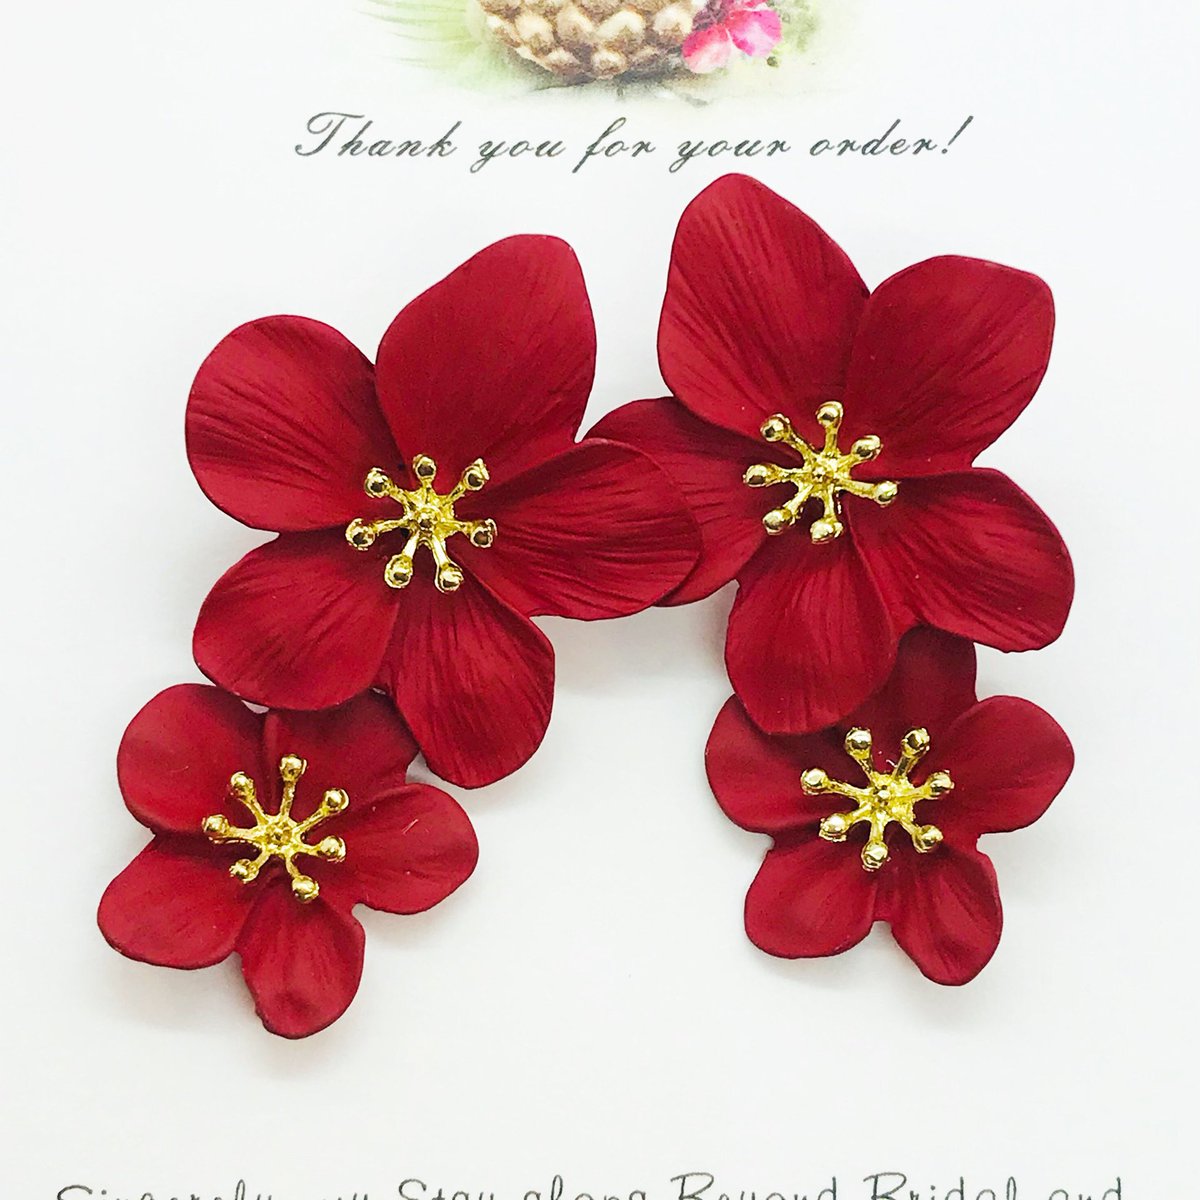 Excited to share this item from my #etsy shop: Red metal floral earrings! #redearrings #floralearrings #valentinesgifts #valentinesjewelry #tropicalearrings #valentinesearrings #tropicaljewelry #beachearrings #beachjewelry etsy.me/3a9YC8d